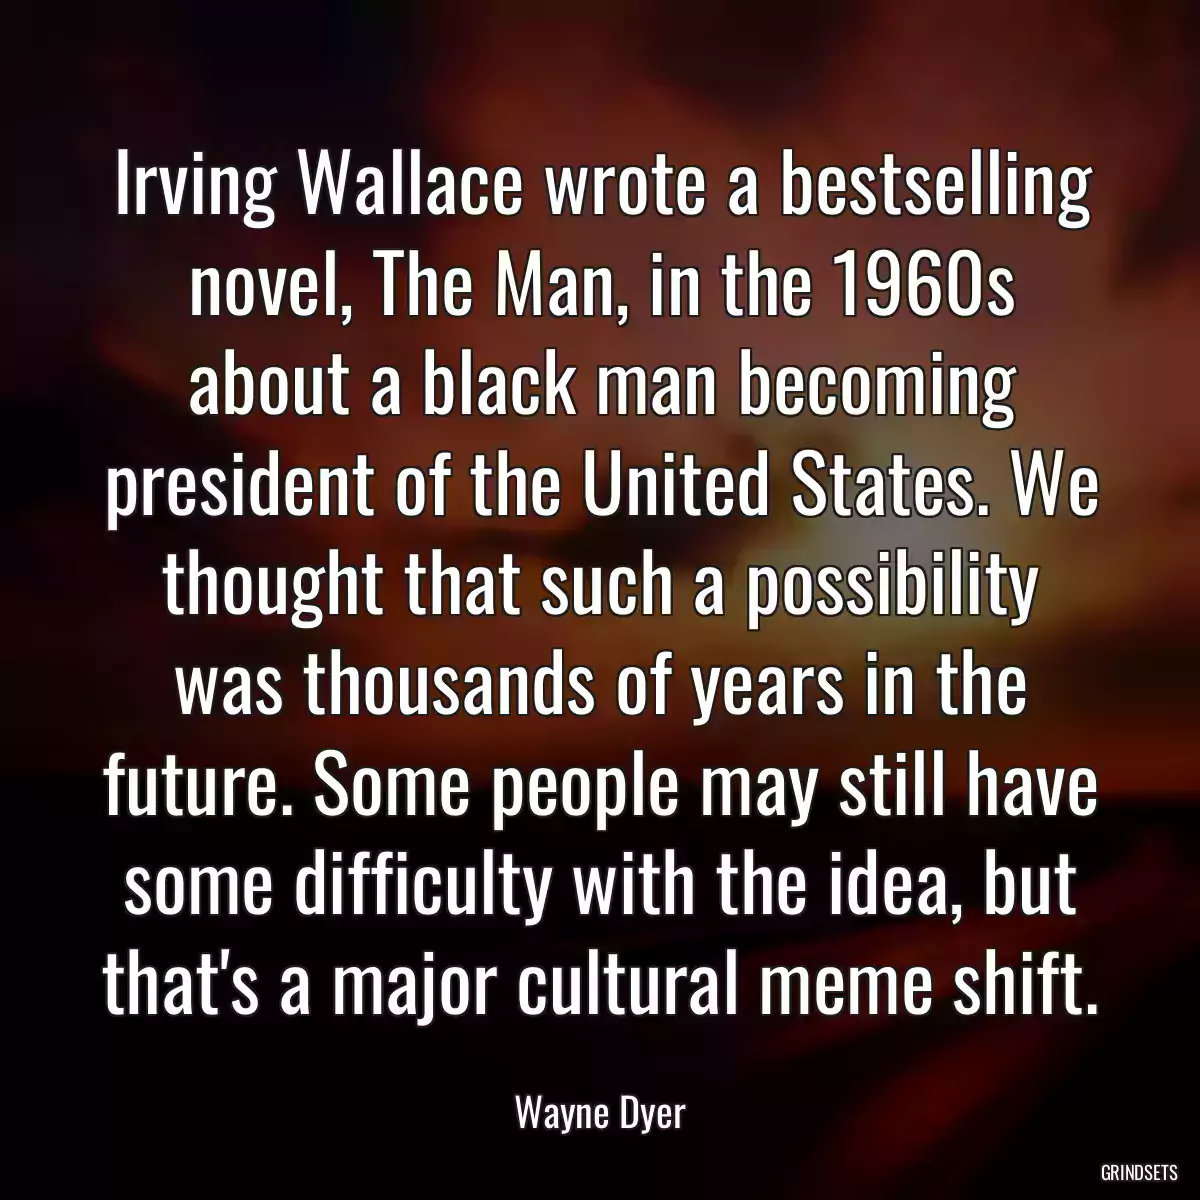 Irving Wallace wrote a bestselling novel, The Man, in the 1960s about a black man becoming president of the United States. We thought that such a possibility was thousands of years in the future. Some people may still have some difficulty with the idea, but that\'s a major cultural meme shift.